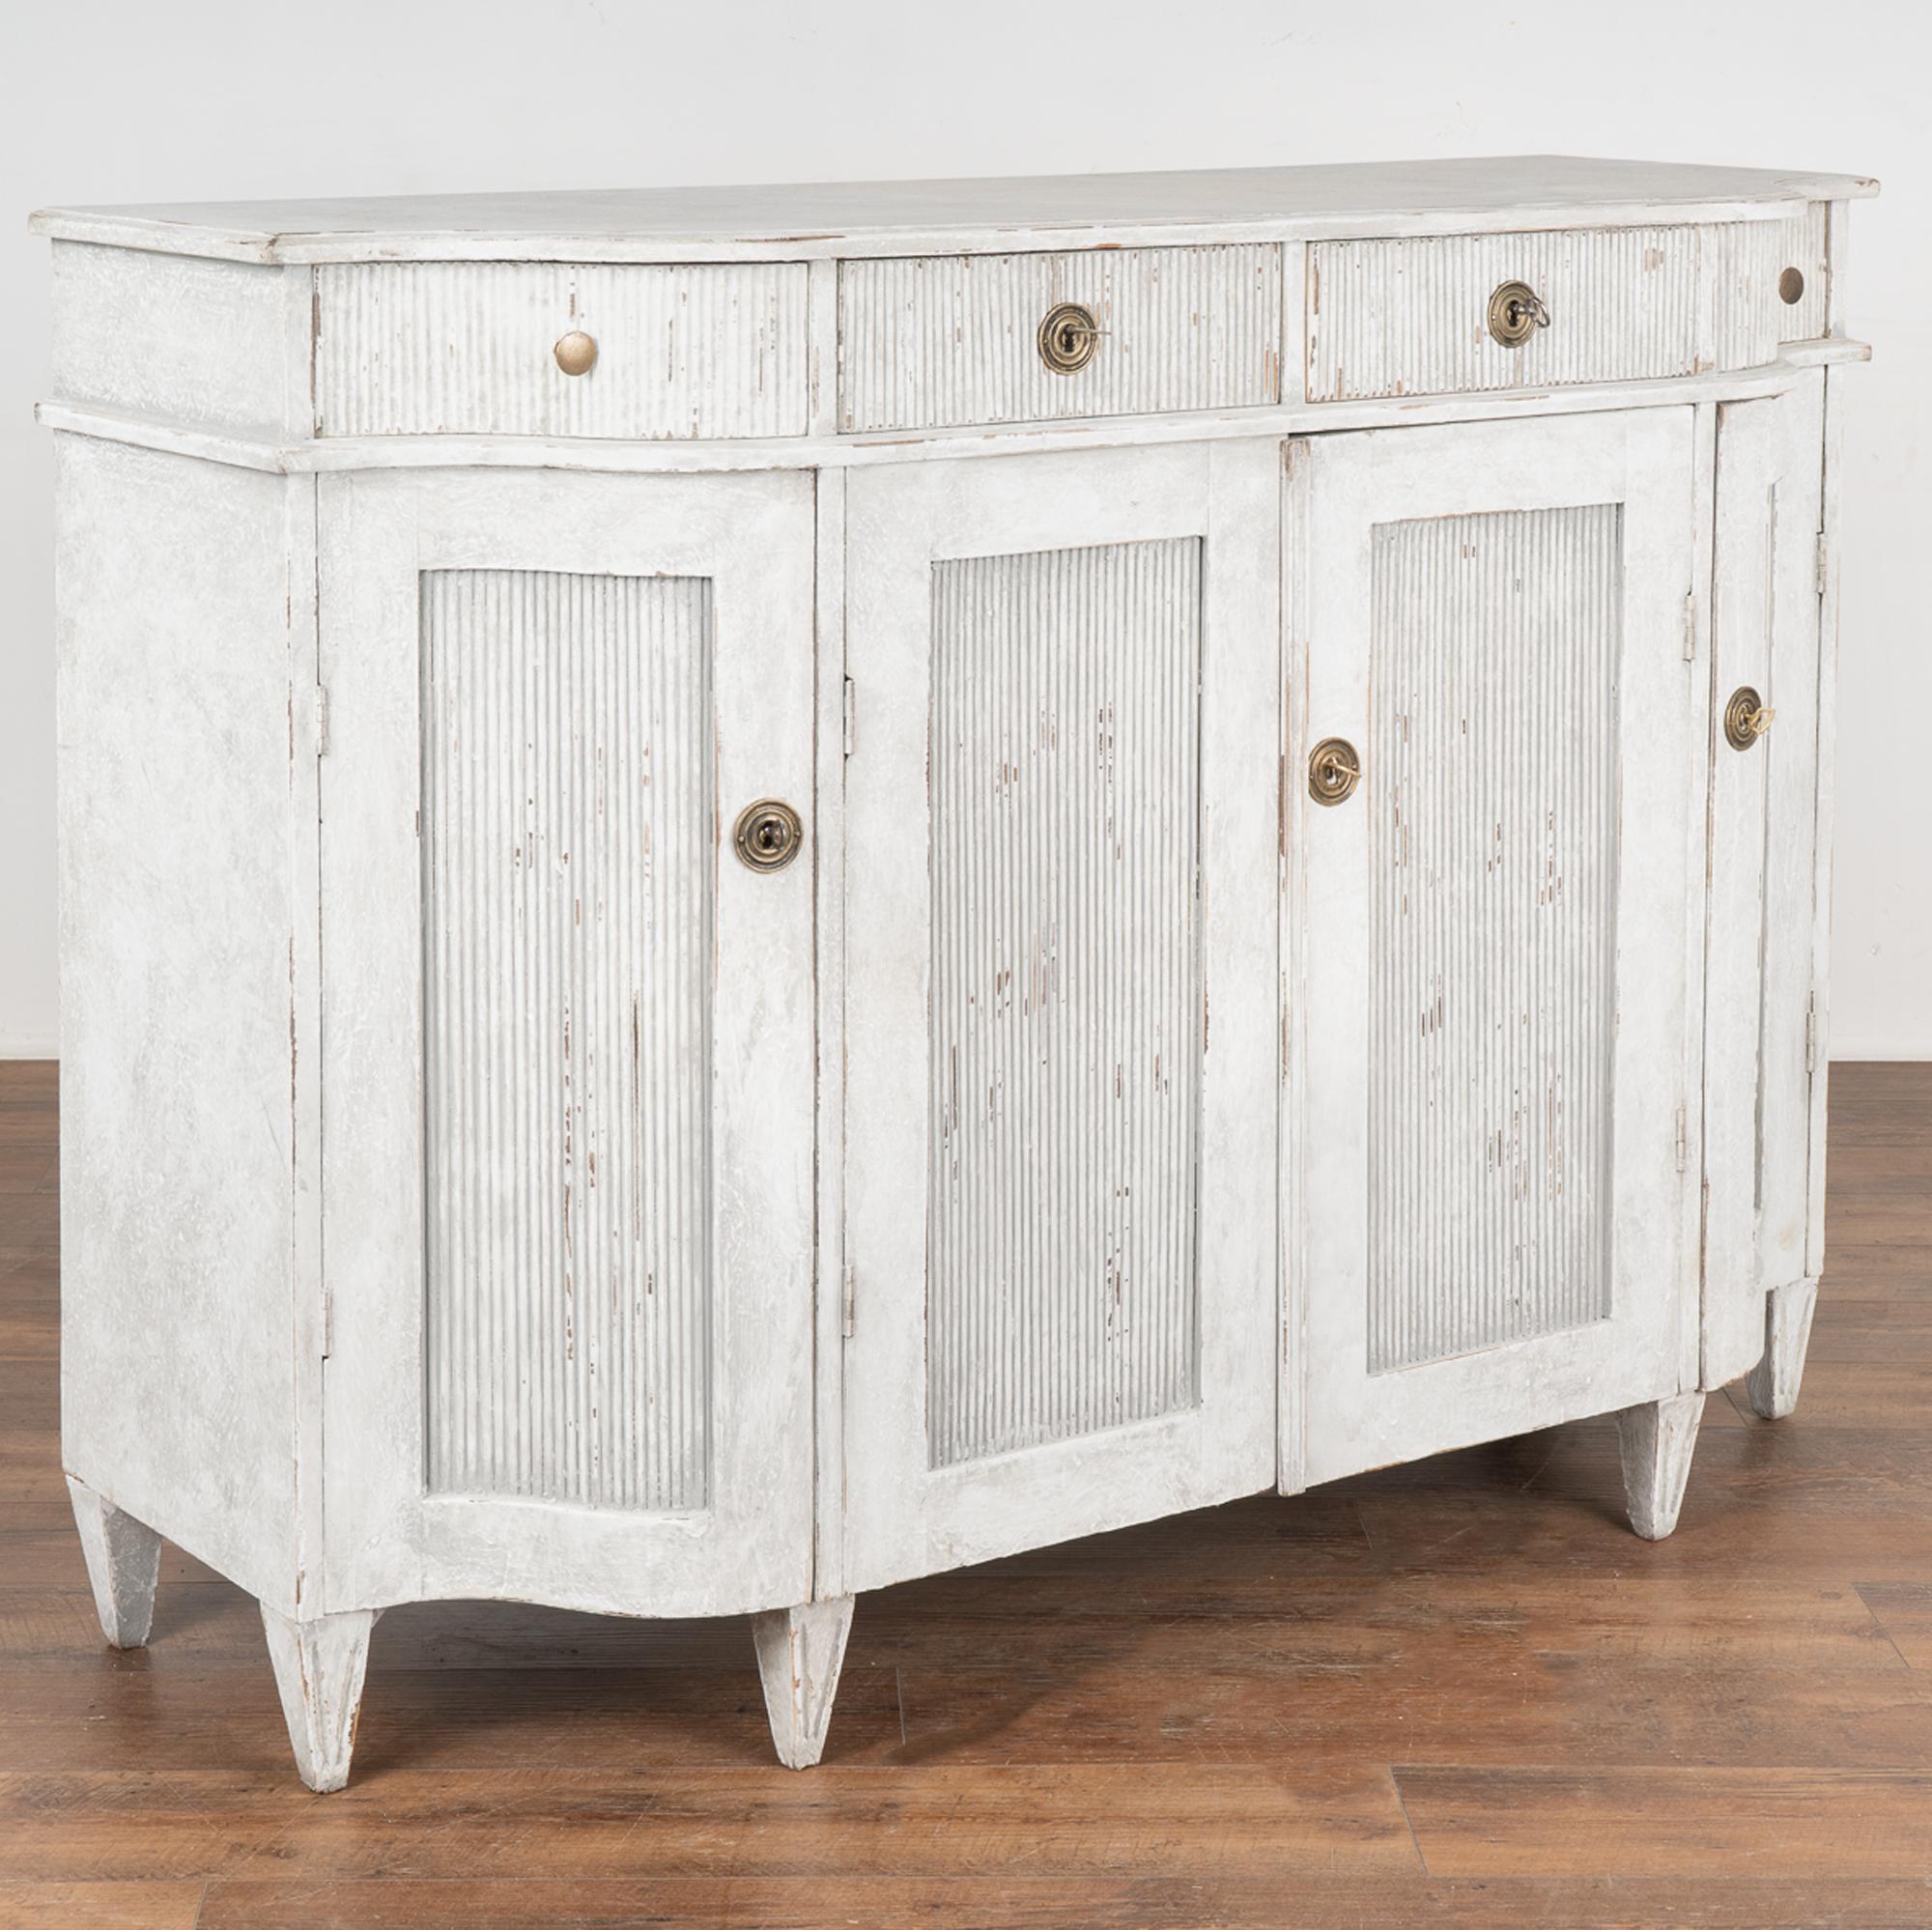 Swedish Gustavian gray painted pine sideboard with attractive curved sides and carved fluted details throughout panel doors and drawers.
It is the curves of the far right and left drawers and doors that create the visual appeal of this lovely